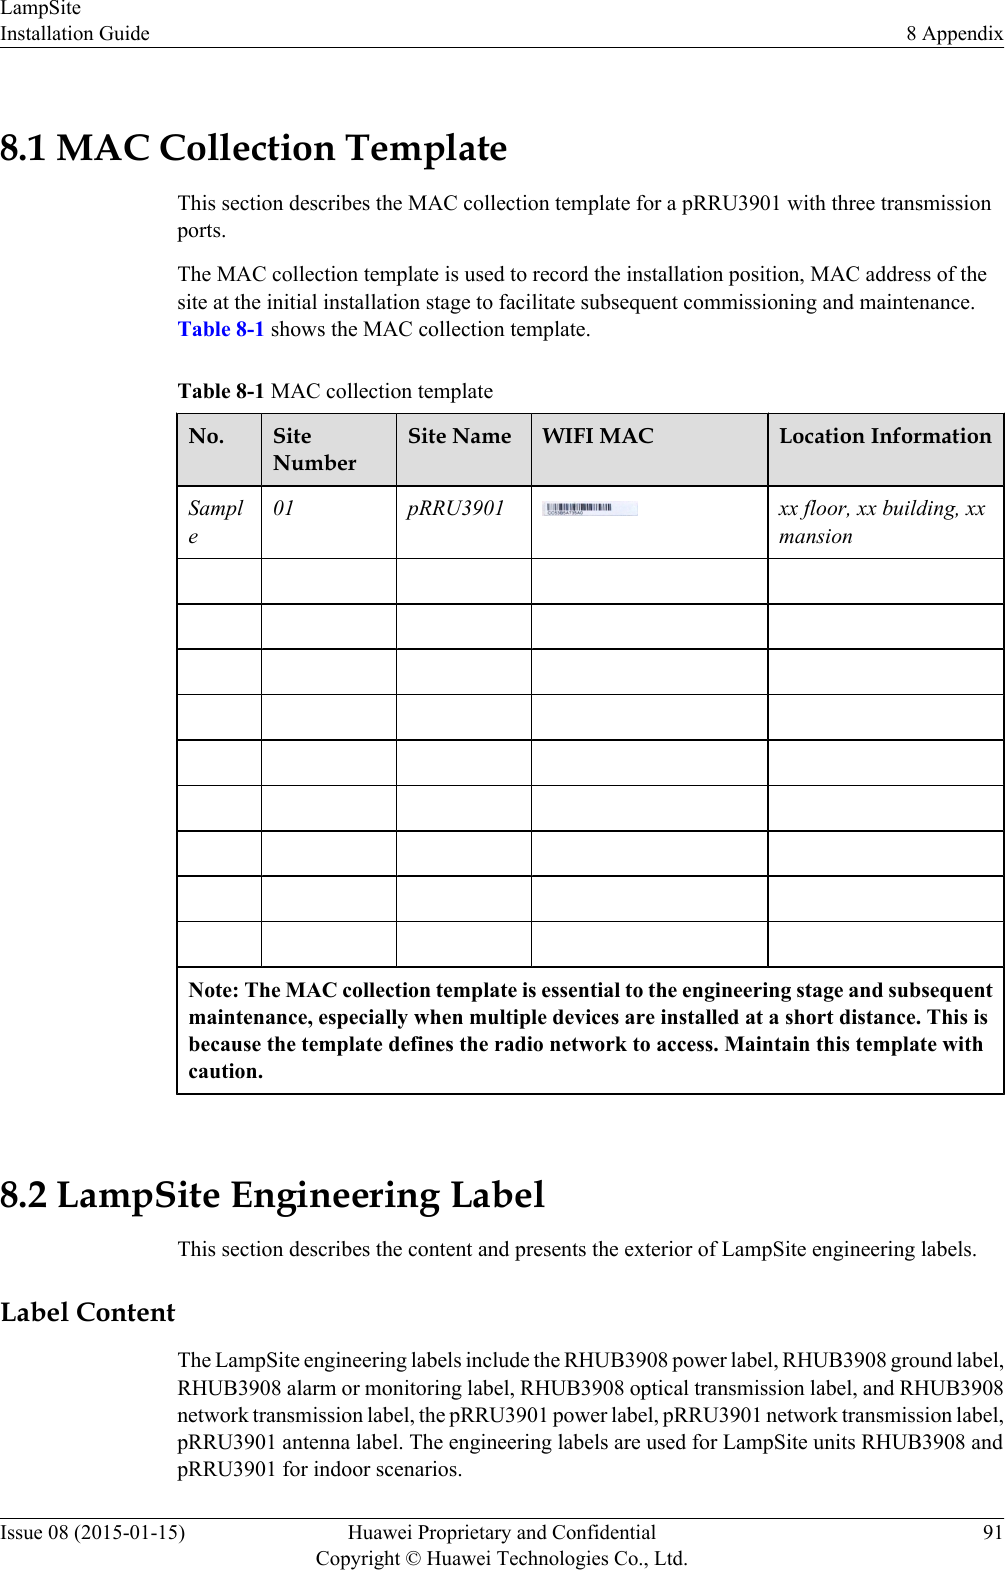 8.1 MAC Collection TemplateThis section describes the MAC collection template for a pRRU3901 with three transmissionports.The MAC collection template is used to record the installation position, MAC address of thesite at the initial installation stage to facilitate subsequent commissioning and maintenance.Table 8-1 shows the MAC collection template.Table 8-1 MAC collection templateNo. SiteNumberSite Name WIFI MAC Location InformationSample01 pRRU3901 xx floor, xx building, xxmansion                                                                                 Note: The MAC collection template is essential to the engineering stage and subsequentmaintenance, especially when multiple devices are installed at a short distance. This isbecause the template defines the radio network to access. Maintain this template withcaution. 8.2 LampSite Engineering LabelThis section describes the content and presents the exterior of LampSite engineering labels.Label ContentThe LampSite engineering labels include the RHUB3908 power label, RHUB3908 ground label,RHUB3908 alarm or monitoring label, RHUB3908 optical transmission label, and RHUB3908network transmission label, the pRRU3901 power label, pRRU3901 network transmission label,pRRU3901 antenna label. The engineering labels are used for LampSite units RHUB3908 andpRRU3901 for indoor scenarios.LampSiteInstallation Guide 8 AppendixIssue 08 (2015-01-15) Huawei Proprietary and ConfidentialCopyright © Huawei Technologies Co., Ltd.91